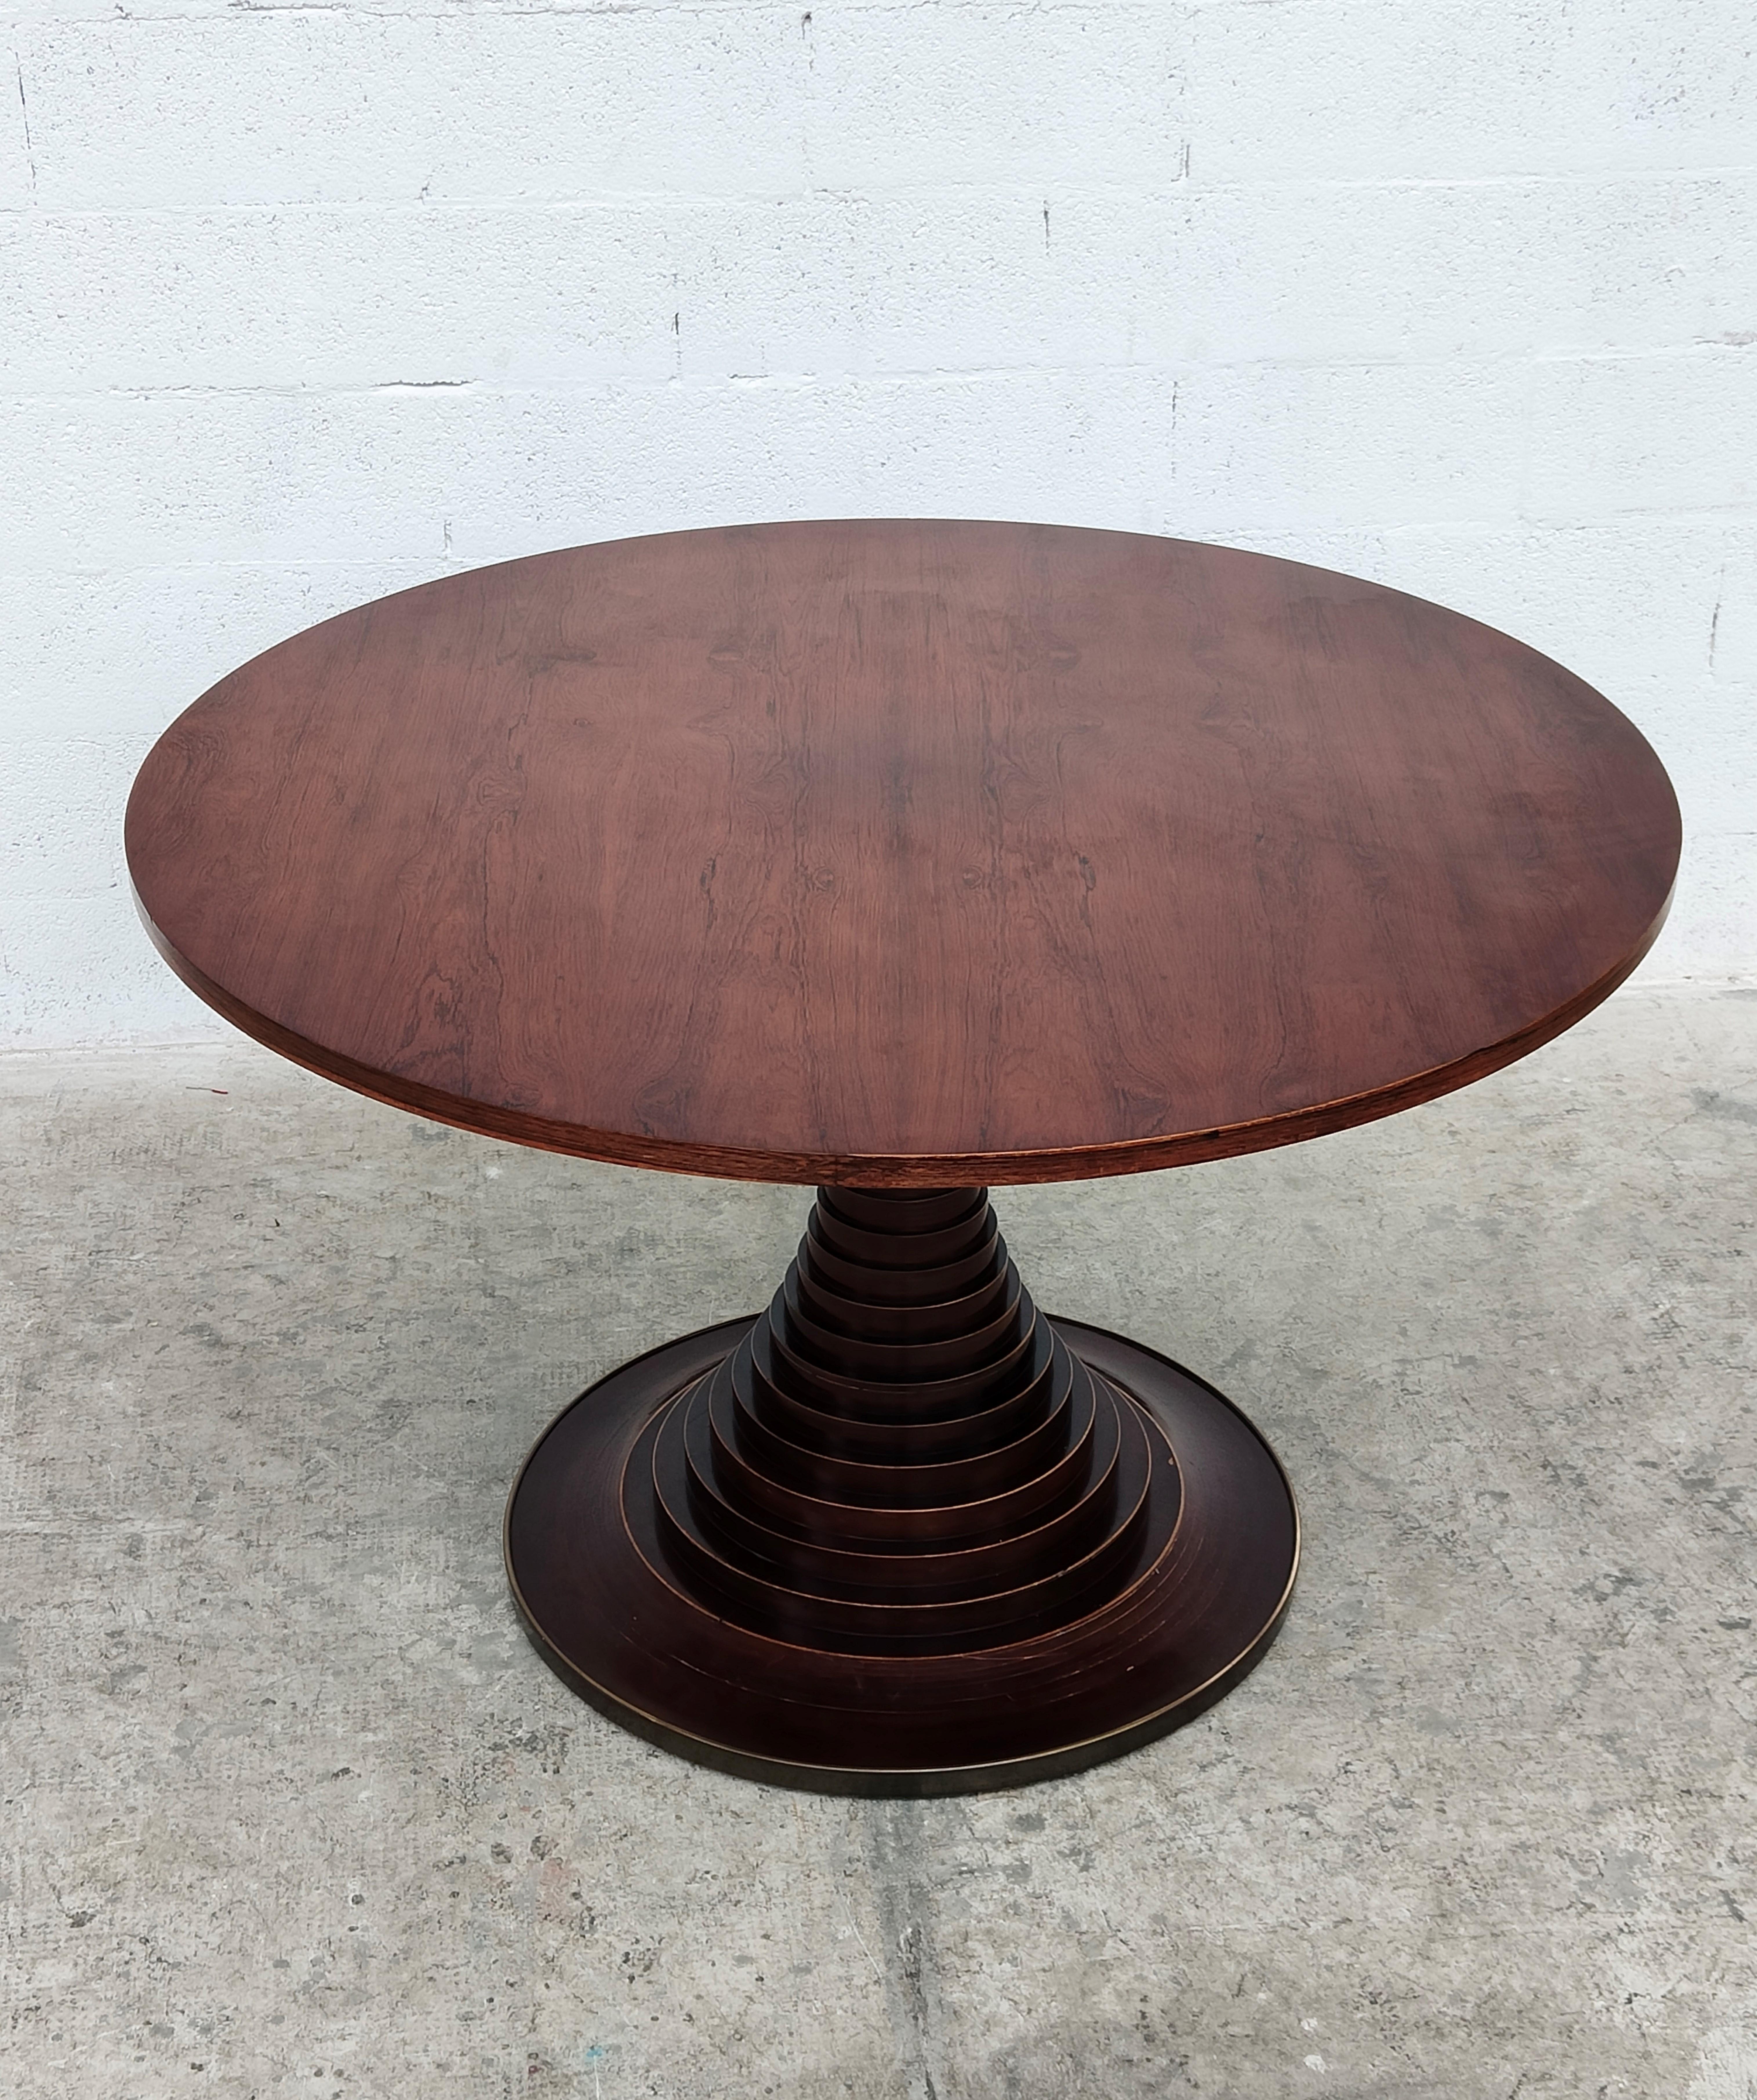 Mid-20th Century Wooden Round Dining Table by Carlo de Carli for Sormani 60s